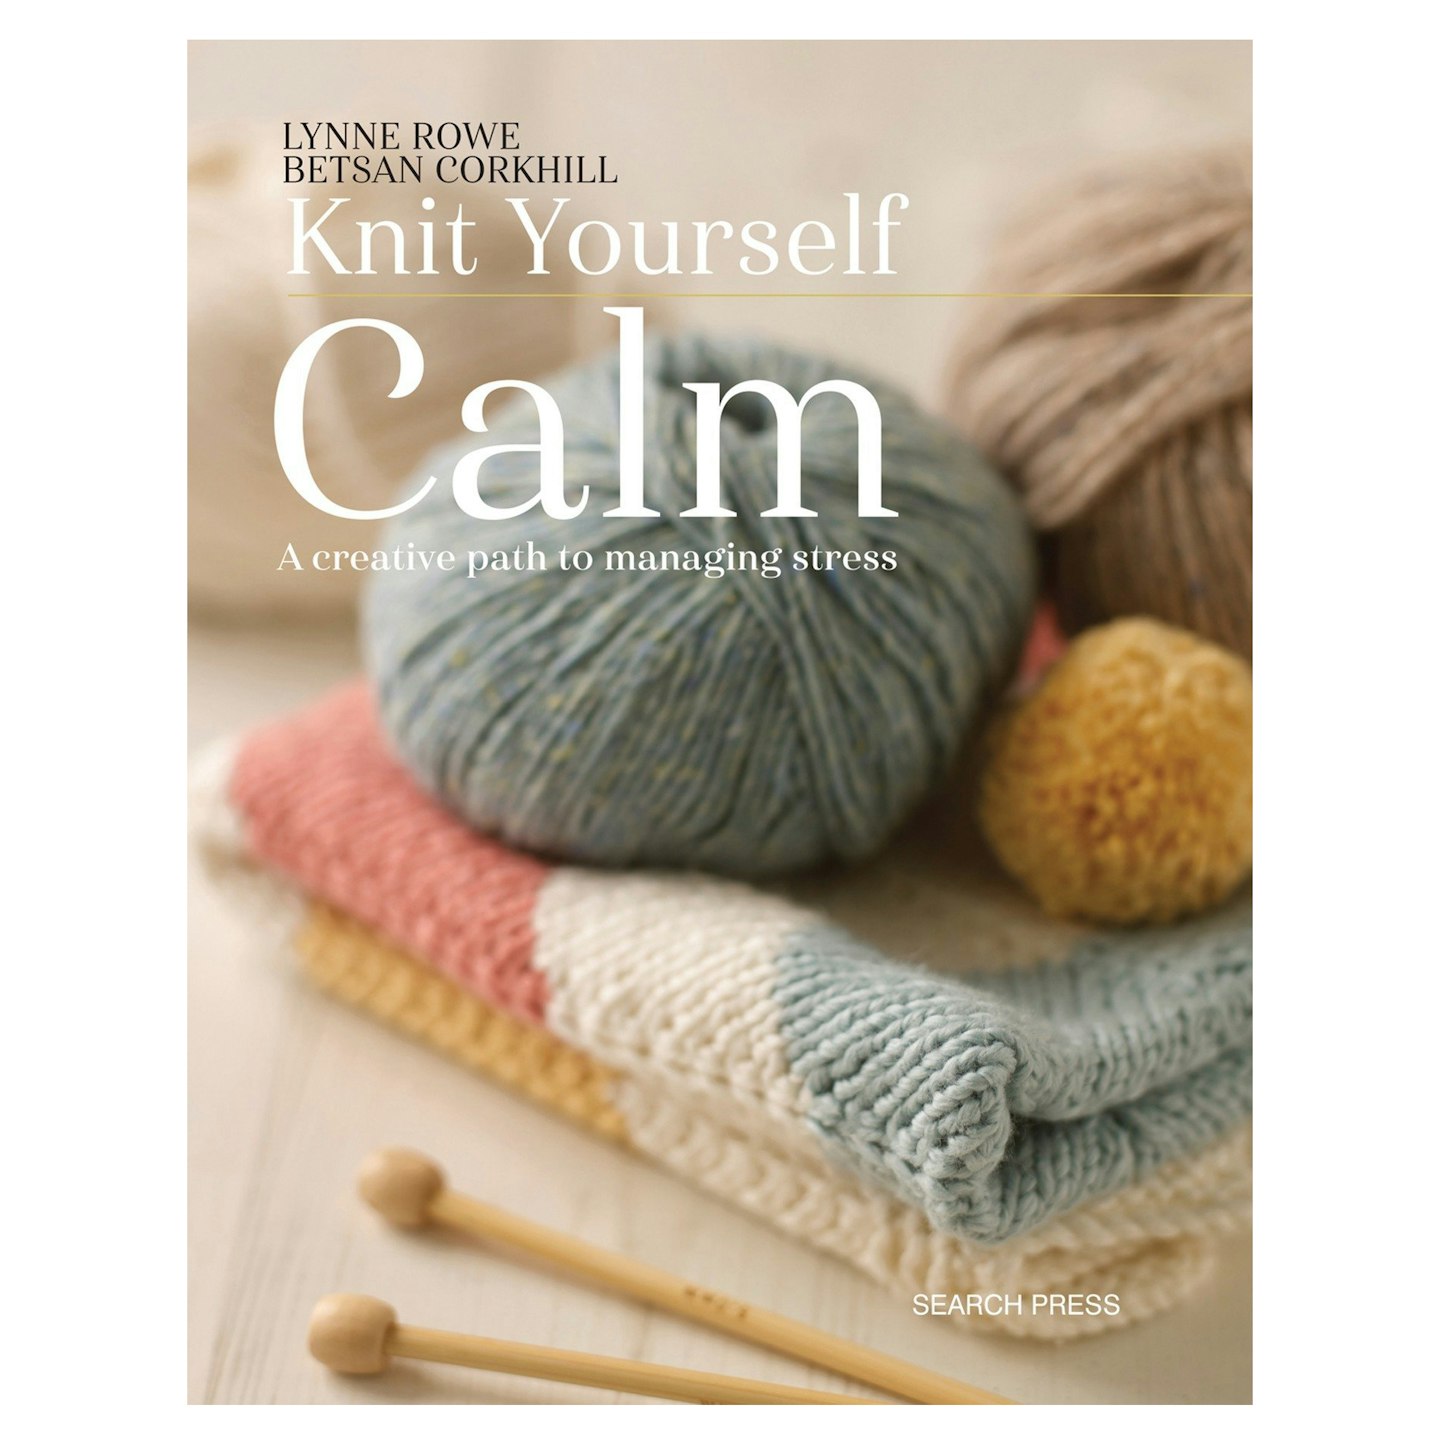 Knit Yourself Calm: A Creative Path to Managing Stress